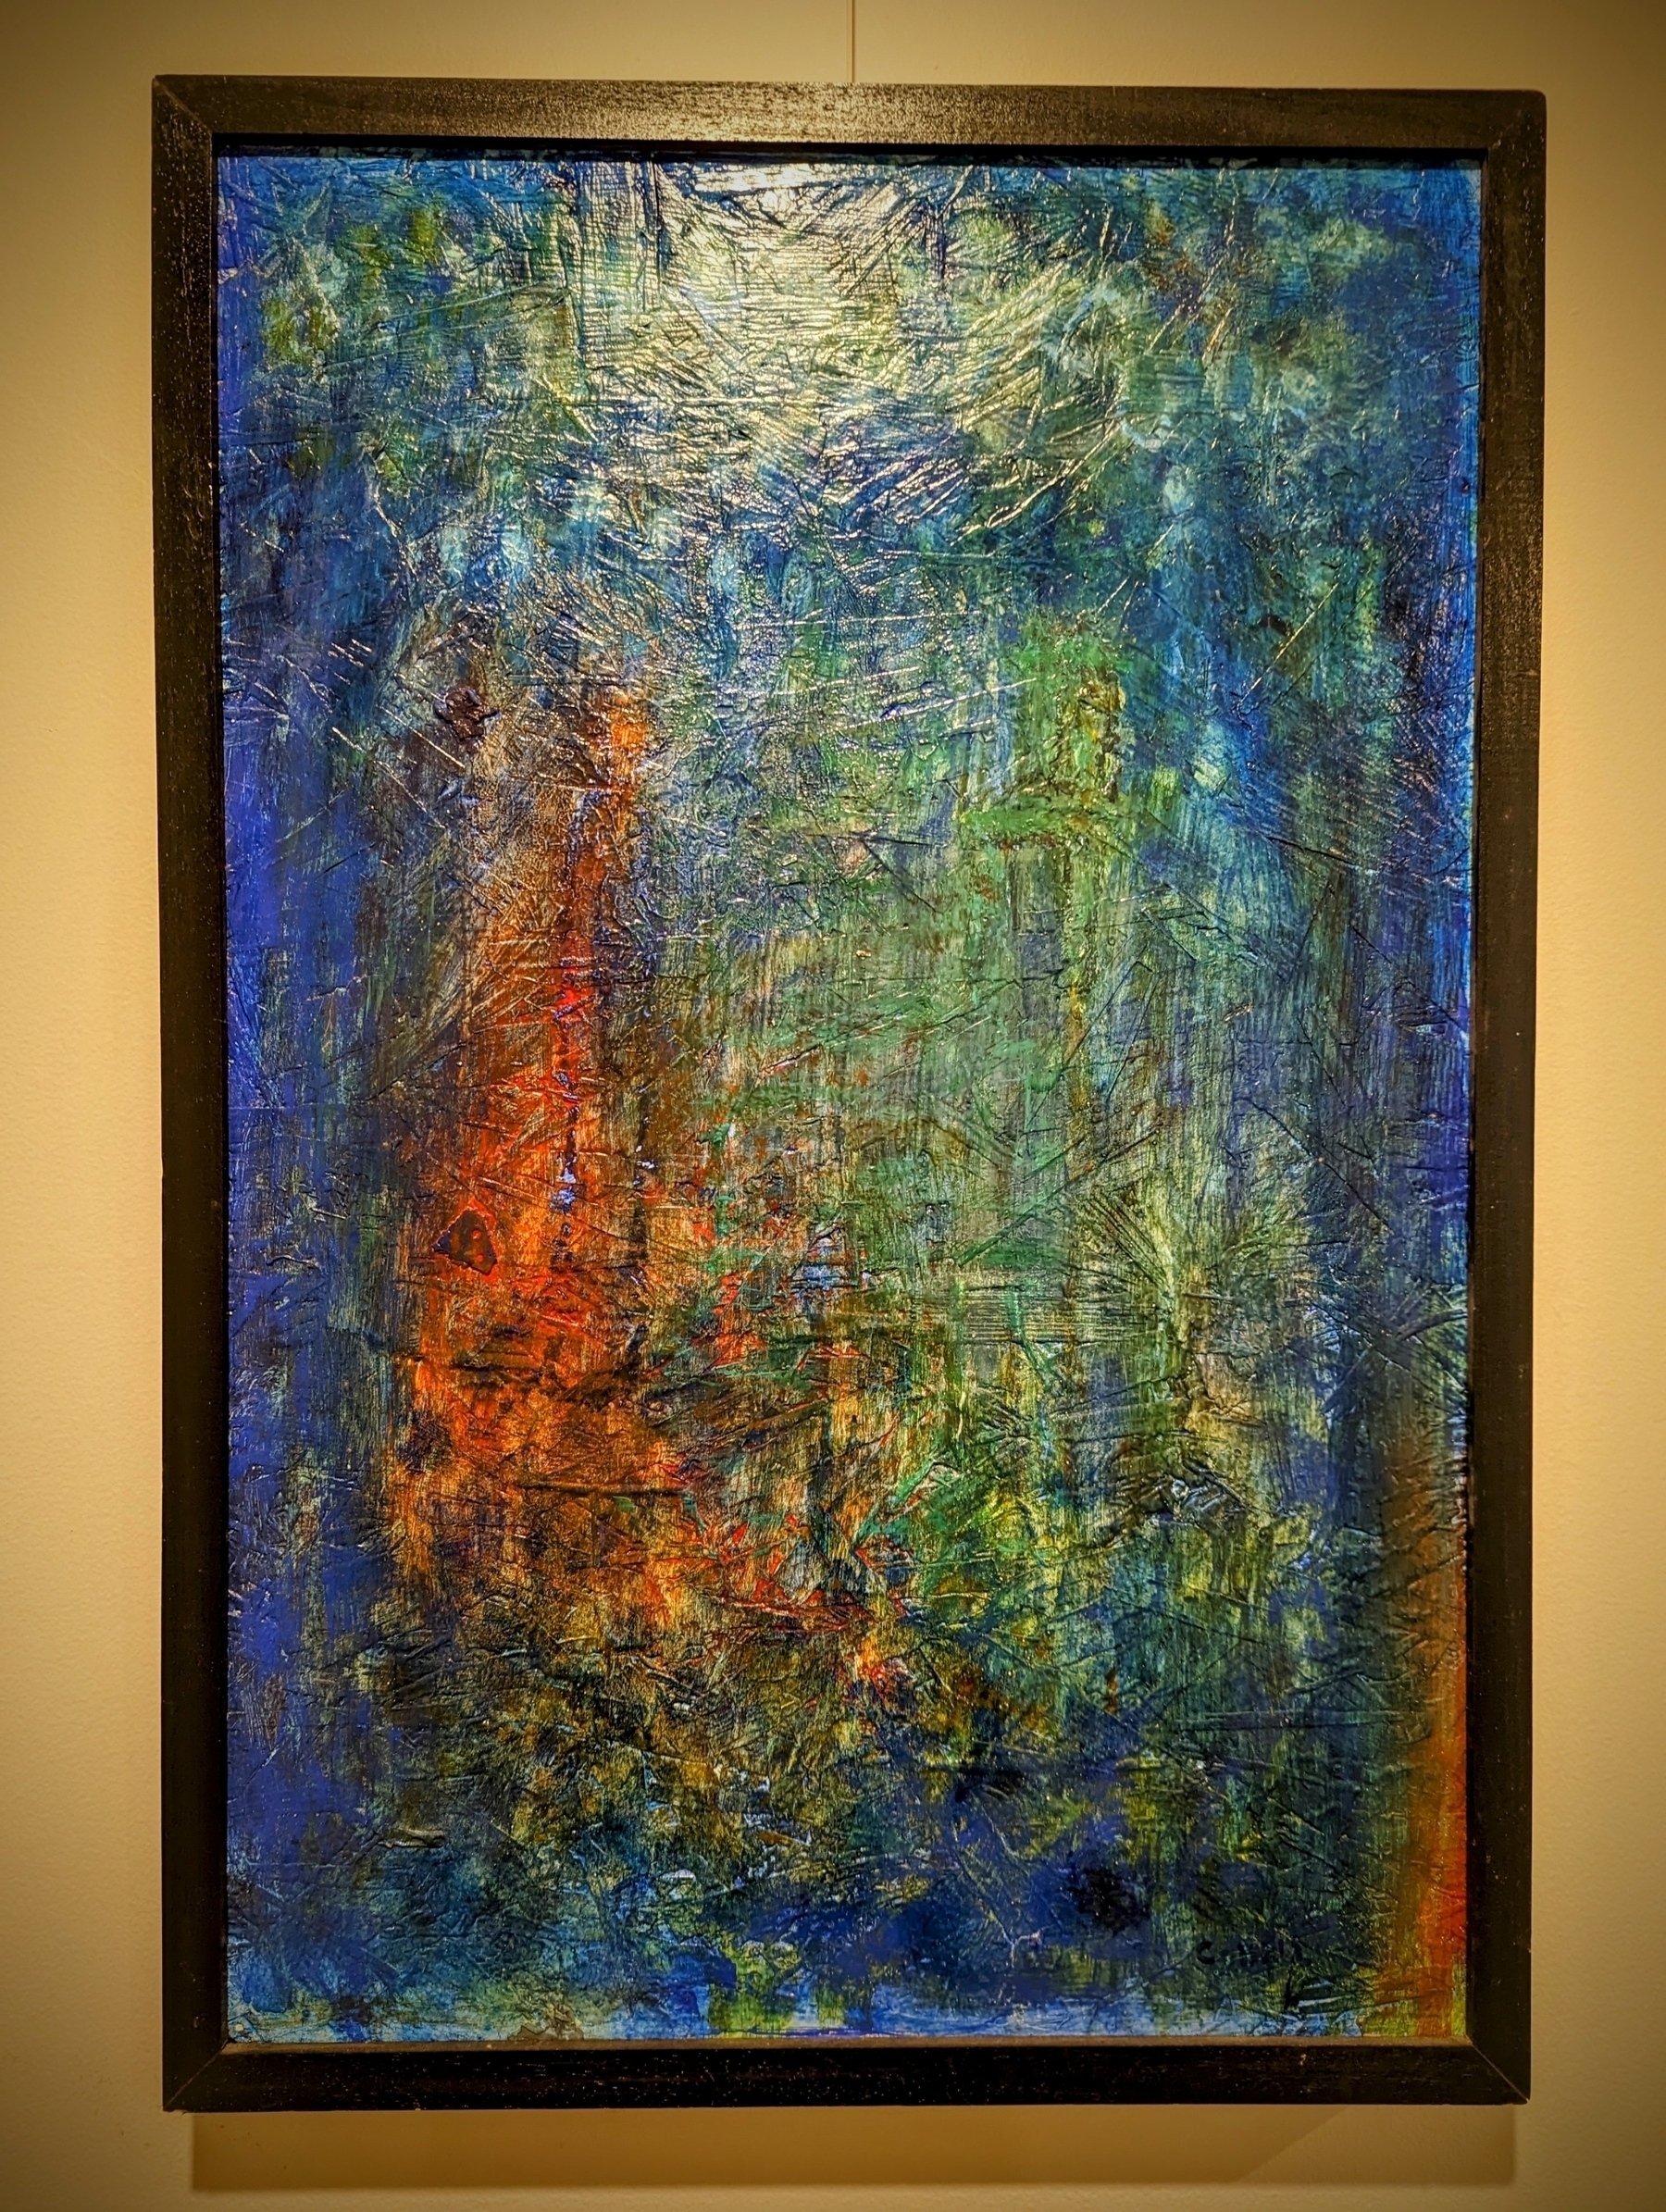 An abstract painting, blue, green and orange.